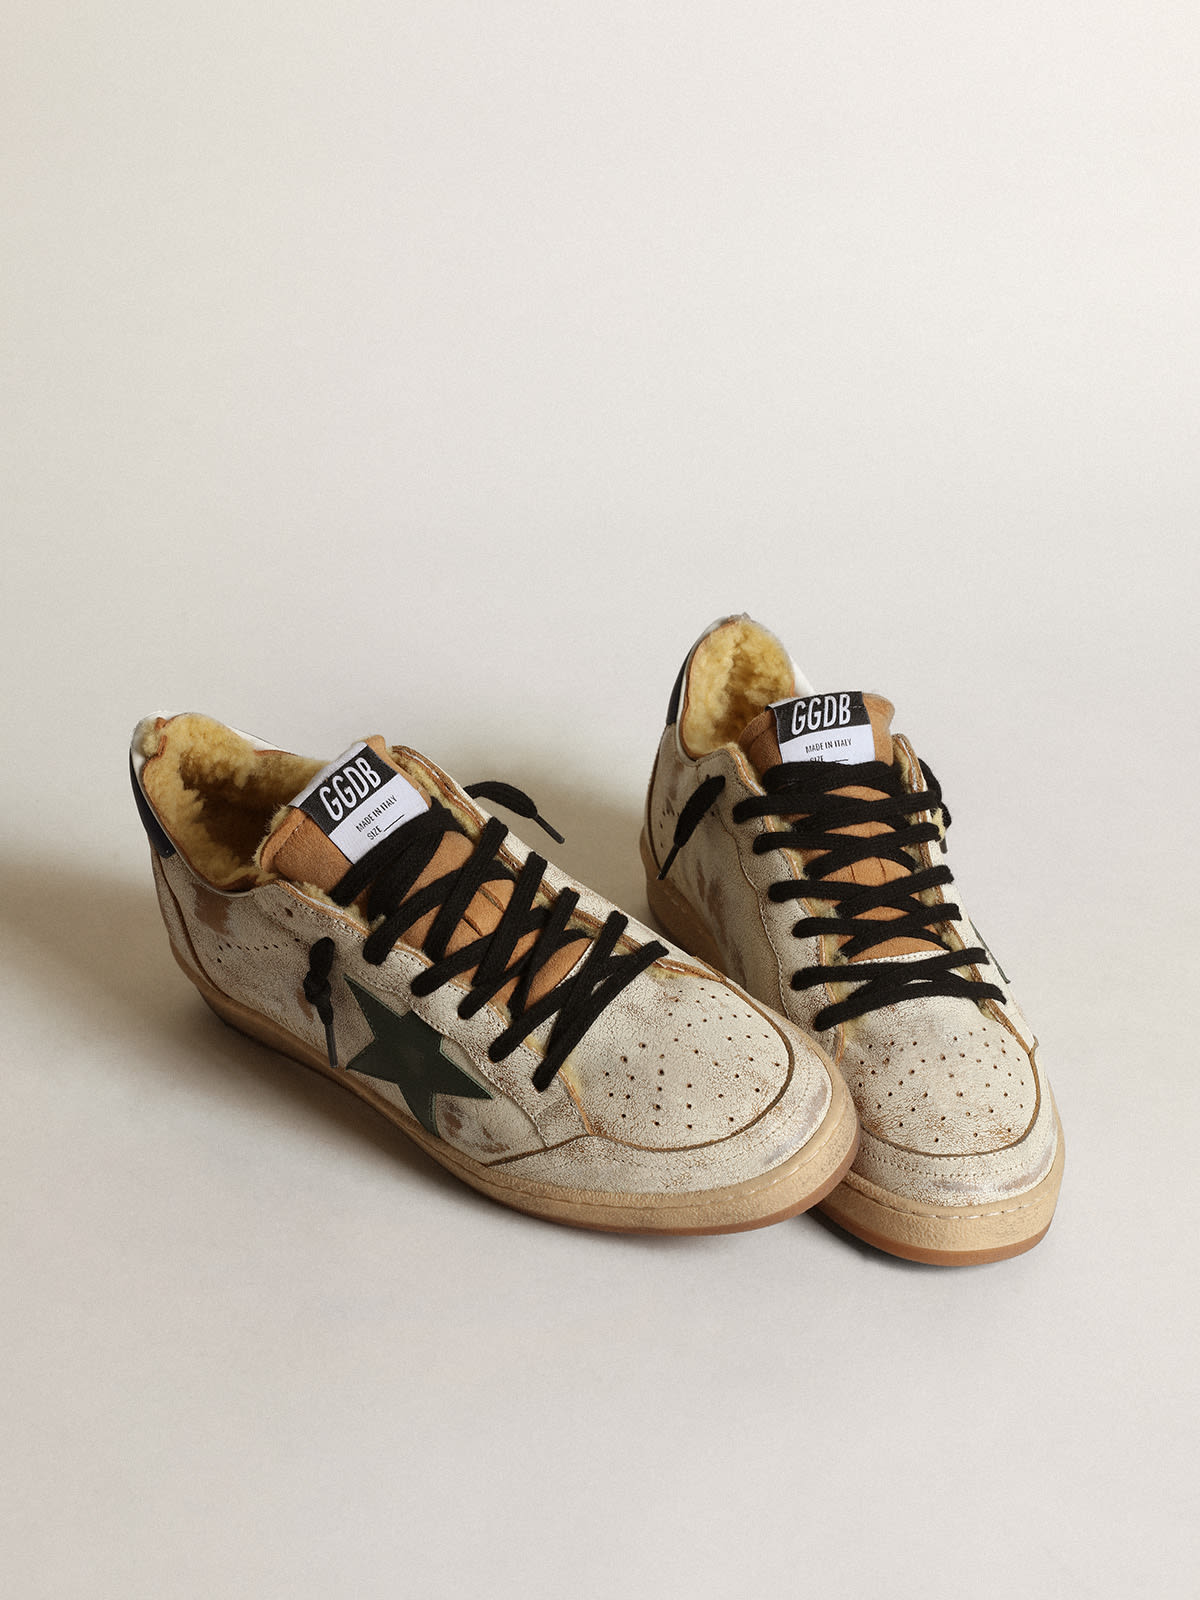 Golden Goose - Ball Star sneakers in glossy white leather with dark green leather star and shearling lining in 